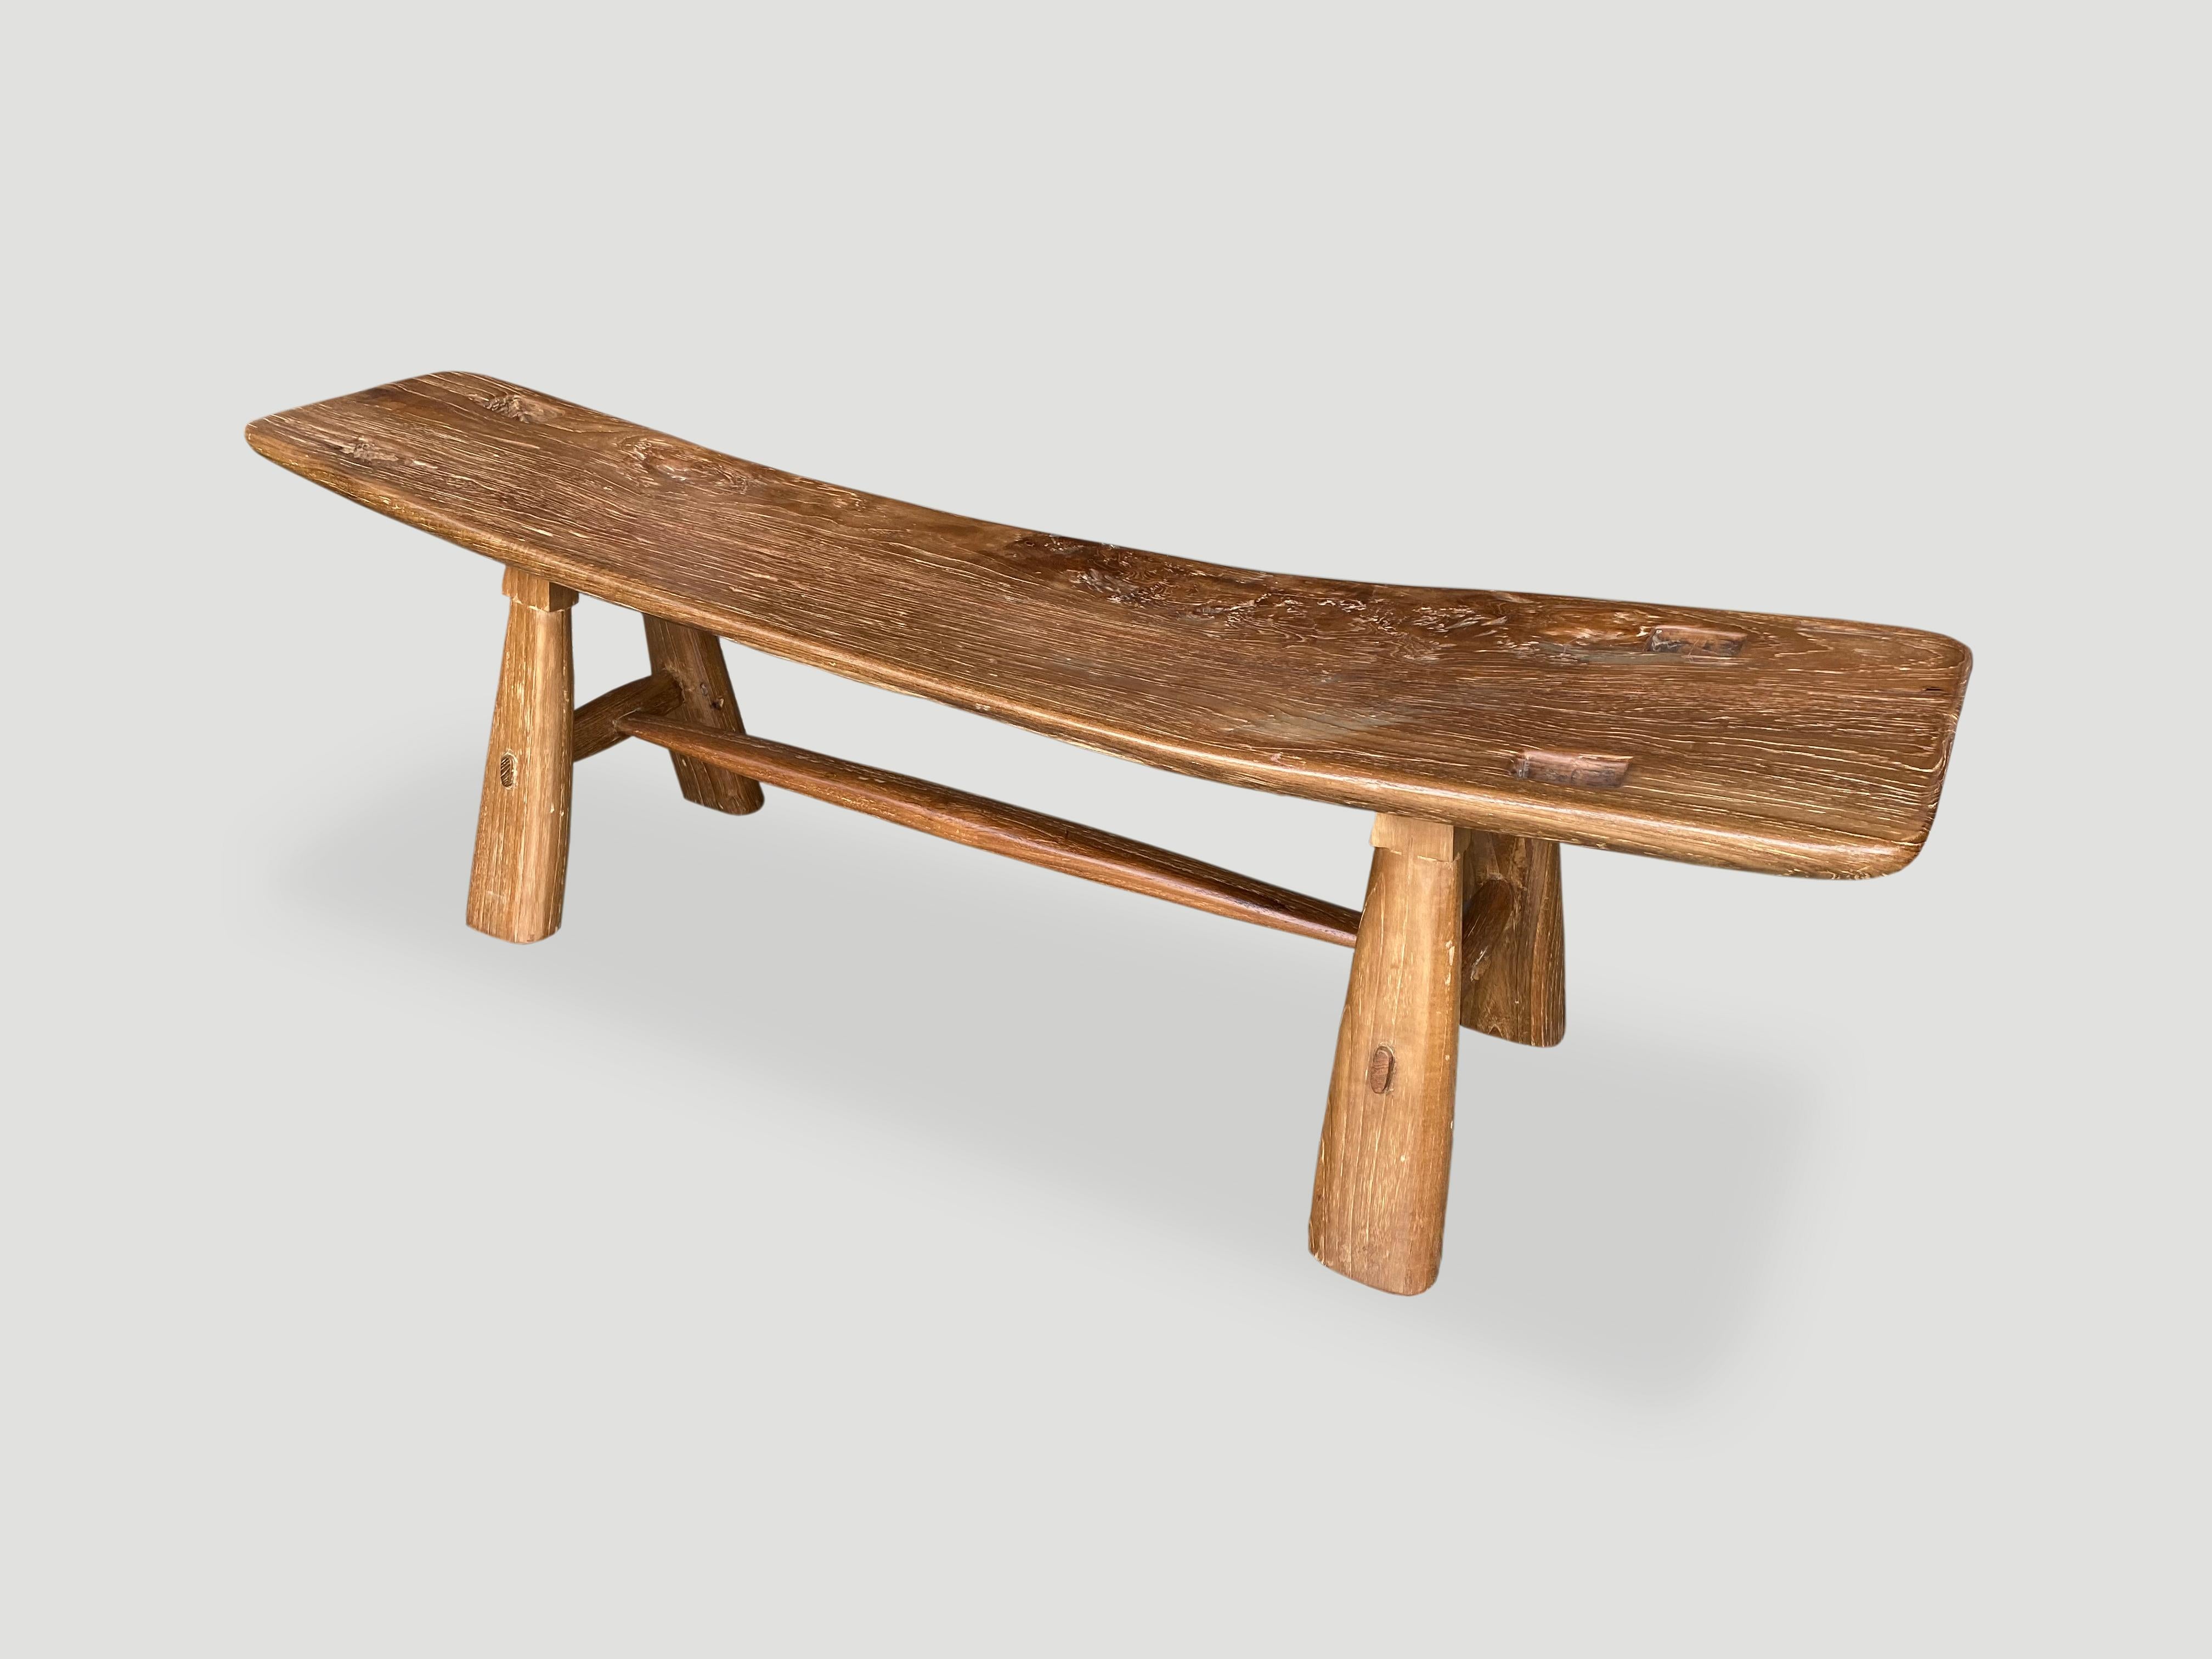 Introducing the midcentury Couture Collection new to 2021. Furniture constructed by hand from start to finish. A beautiful aged teak slab taken from my finest collection with beautiful patina and stunning grain. Originally a Primitive bench, we